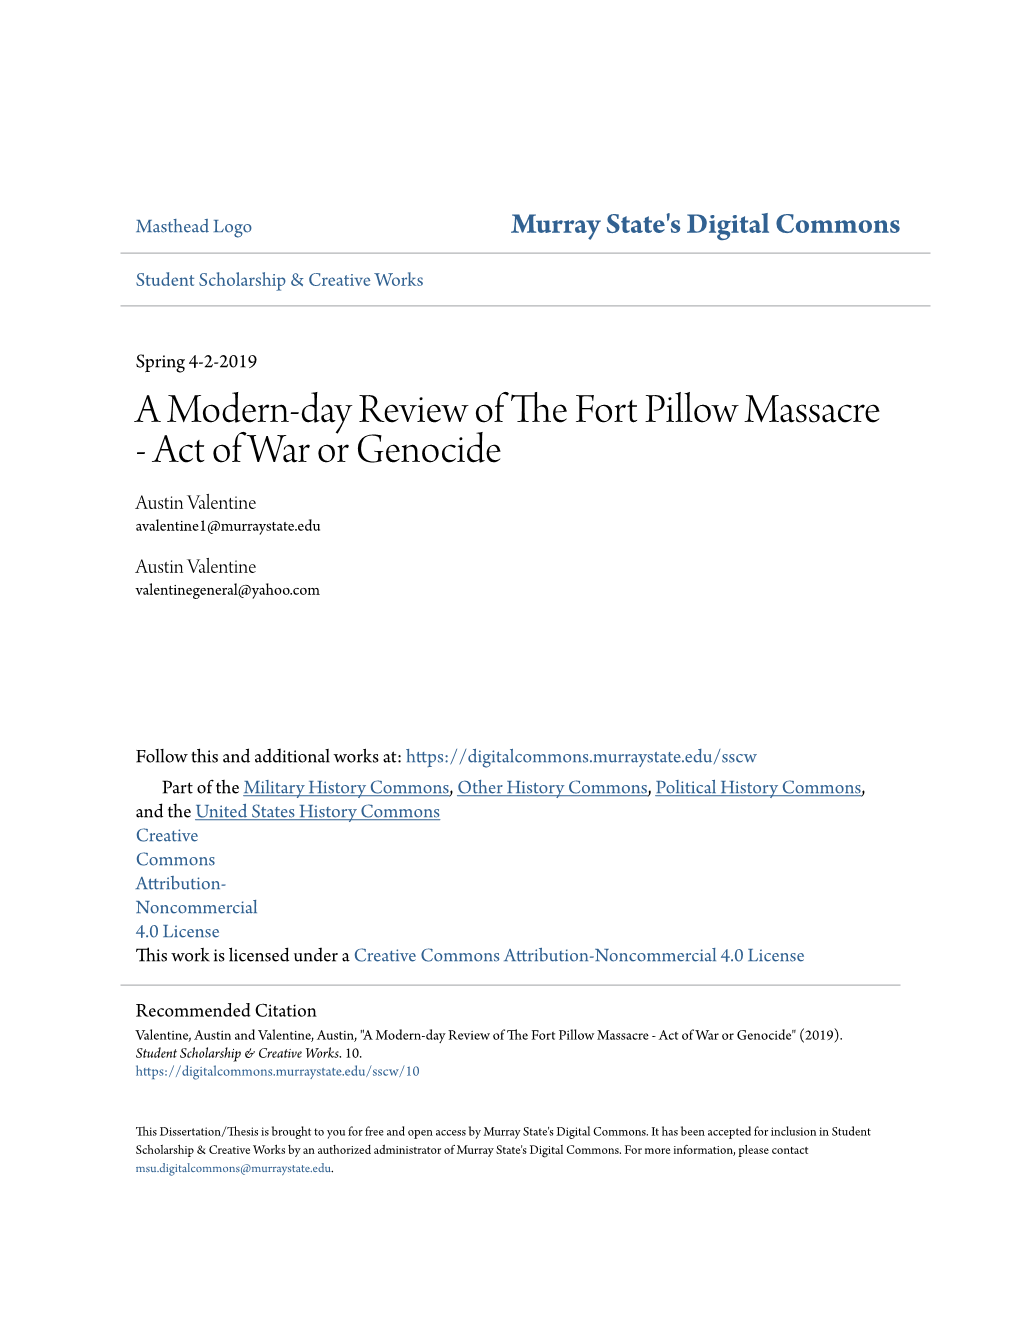 A Modern-Day Review of the Fort Pillow Massacre – Act of War Or Genocide